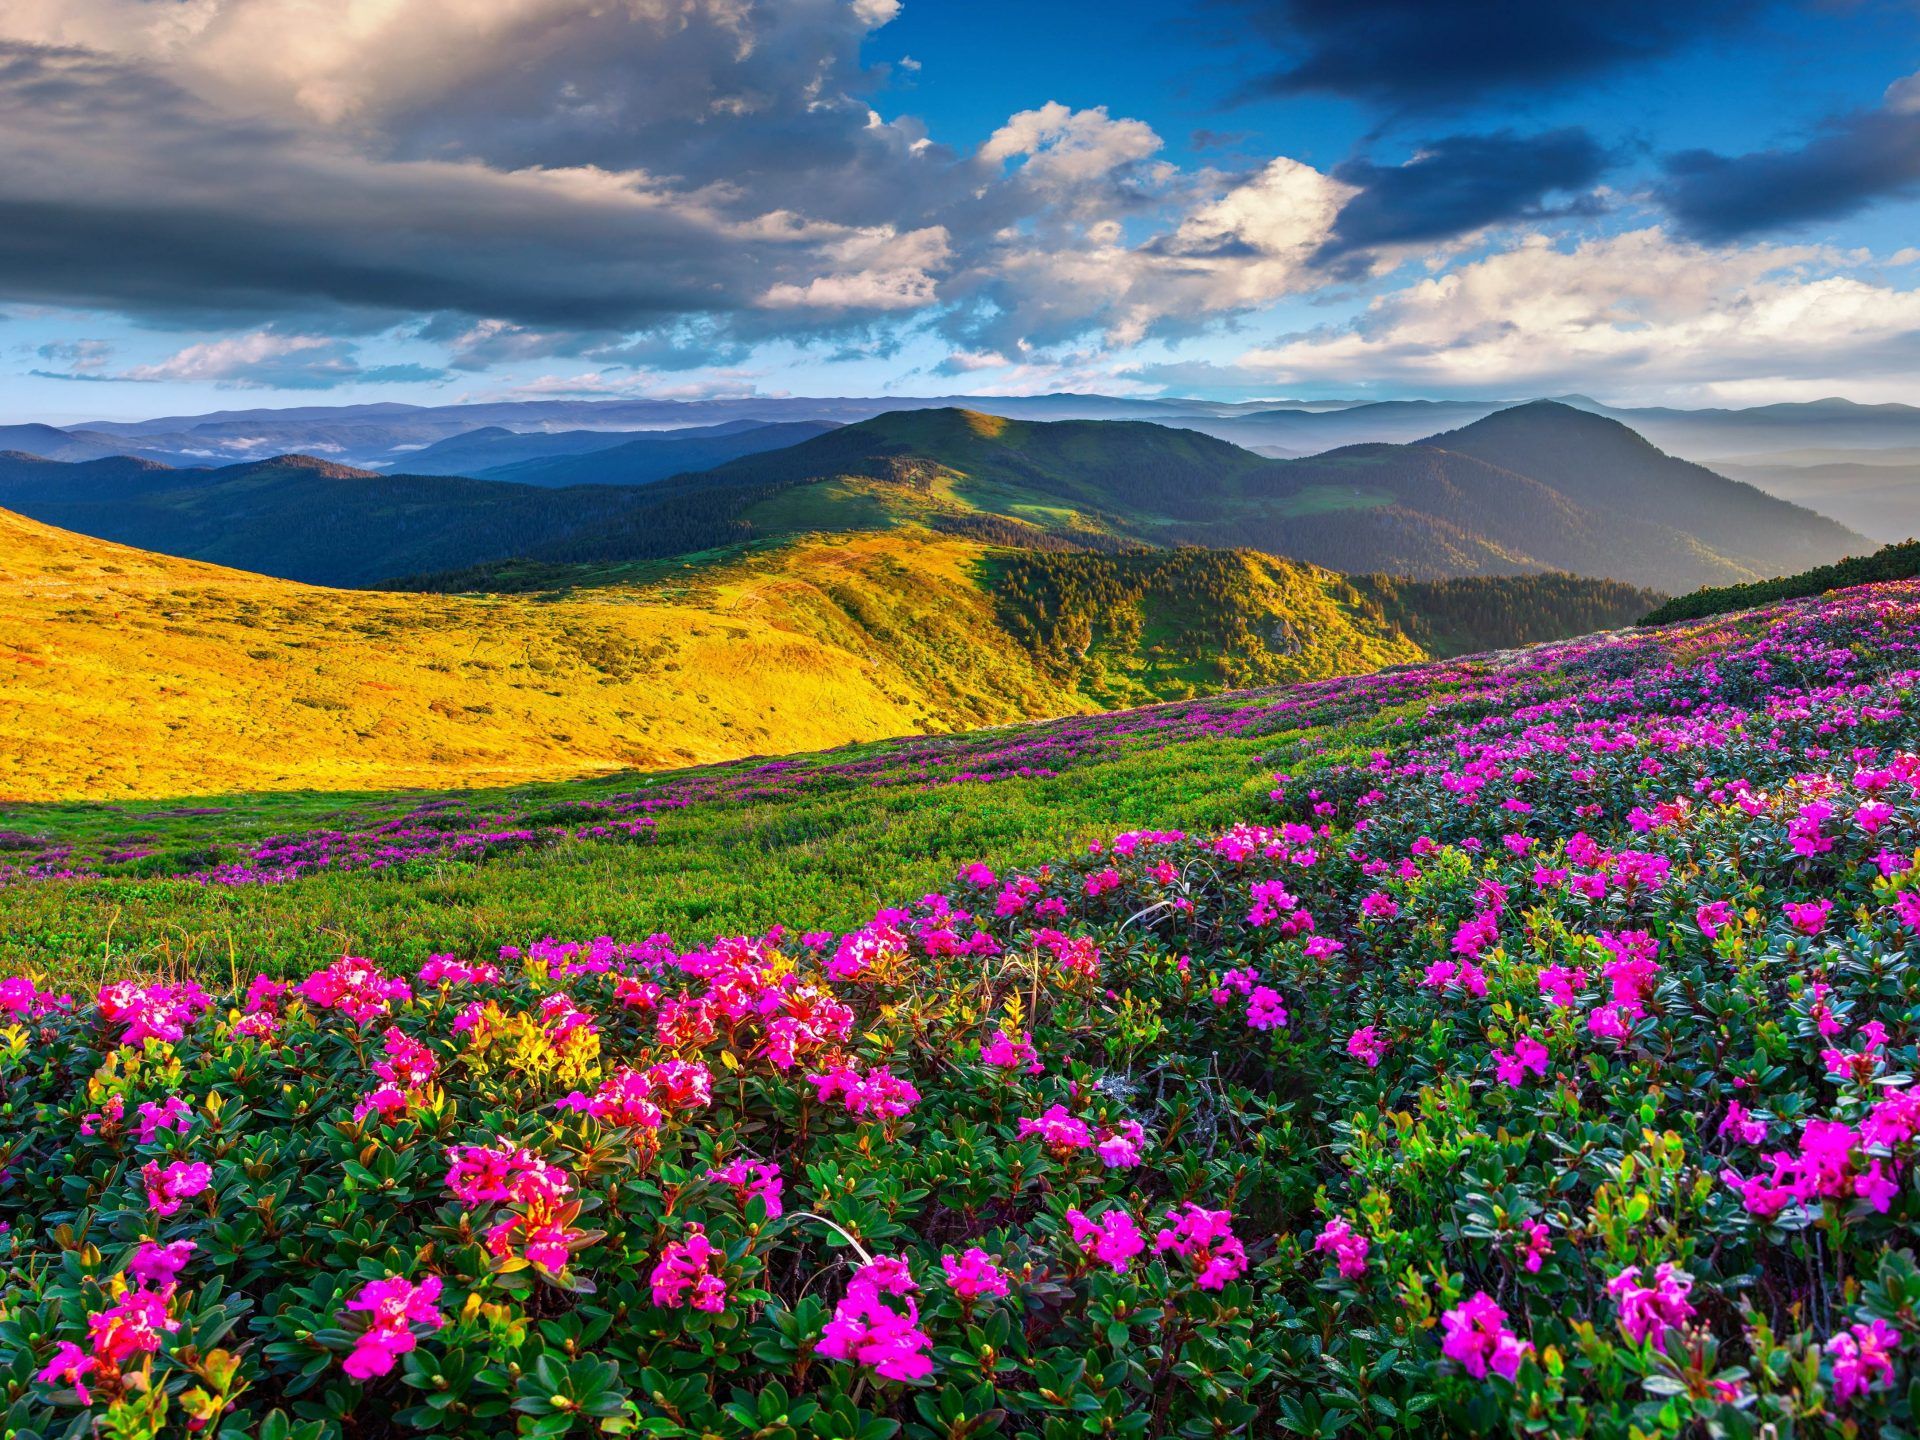 Spring Mountain Landscape Flowers Purple Colored Hills With Green